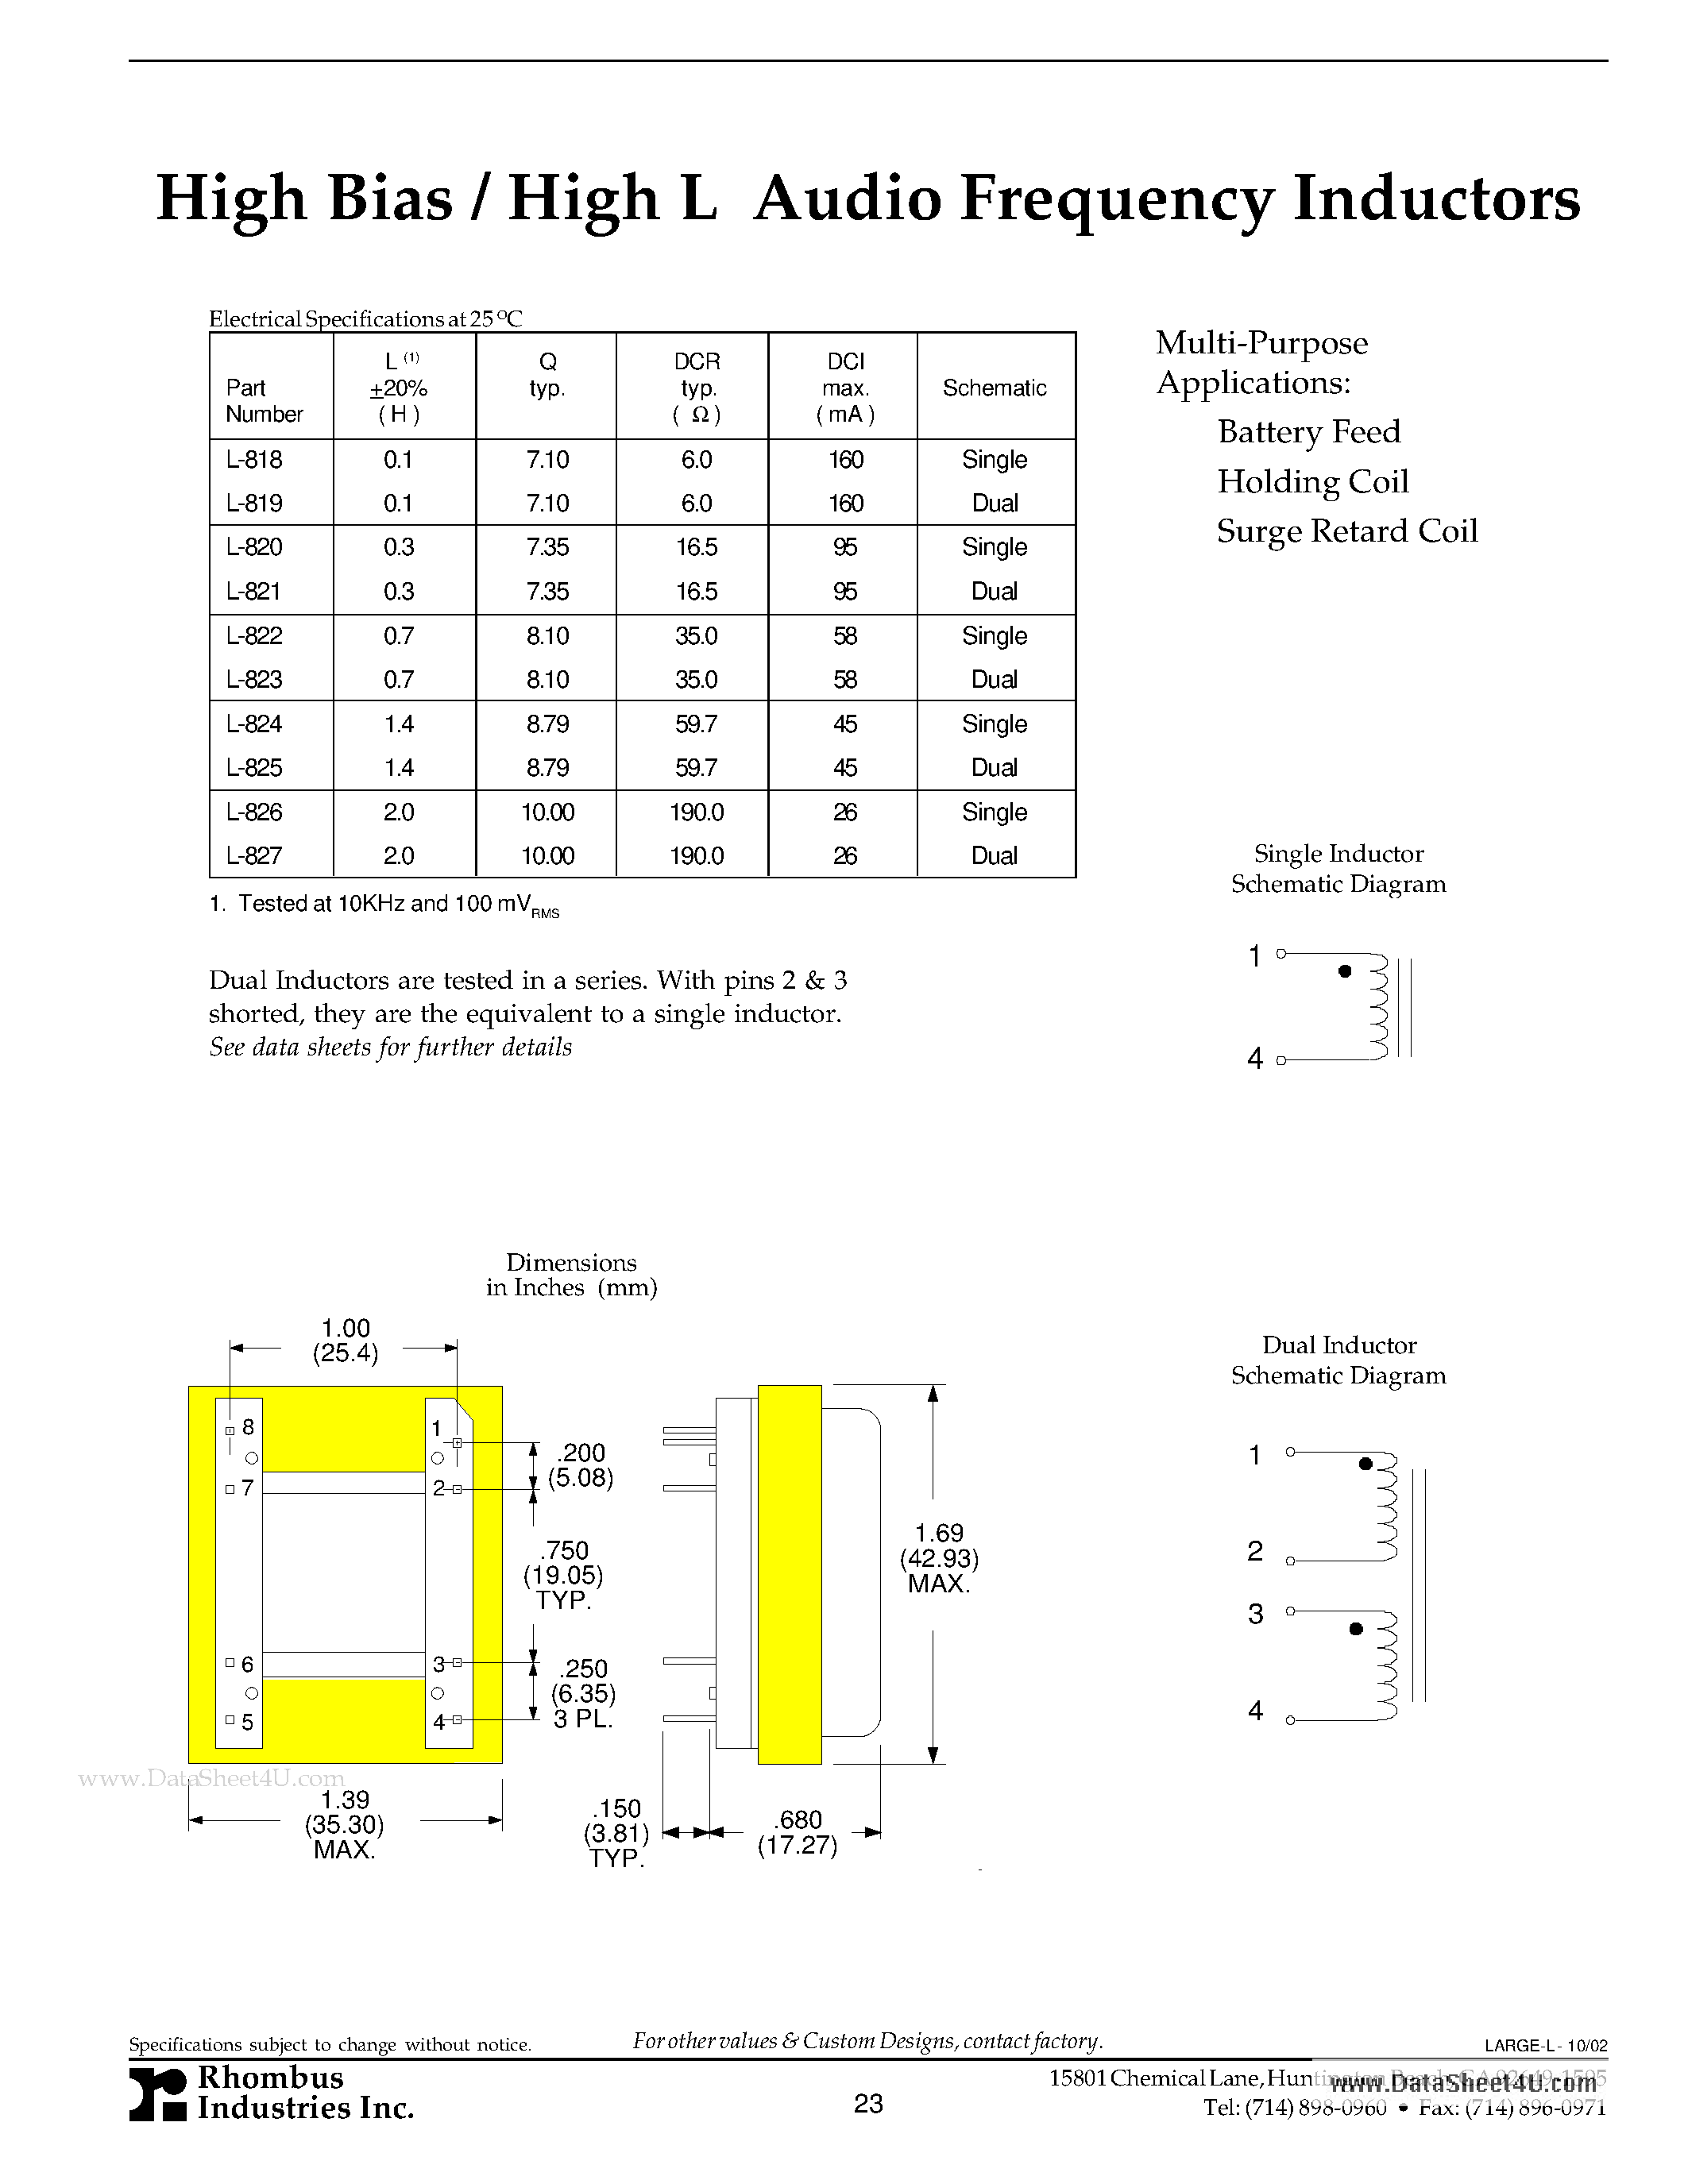 Datasheet L-819 - High Bias / High L Audio Frequency Inductors page 1